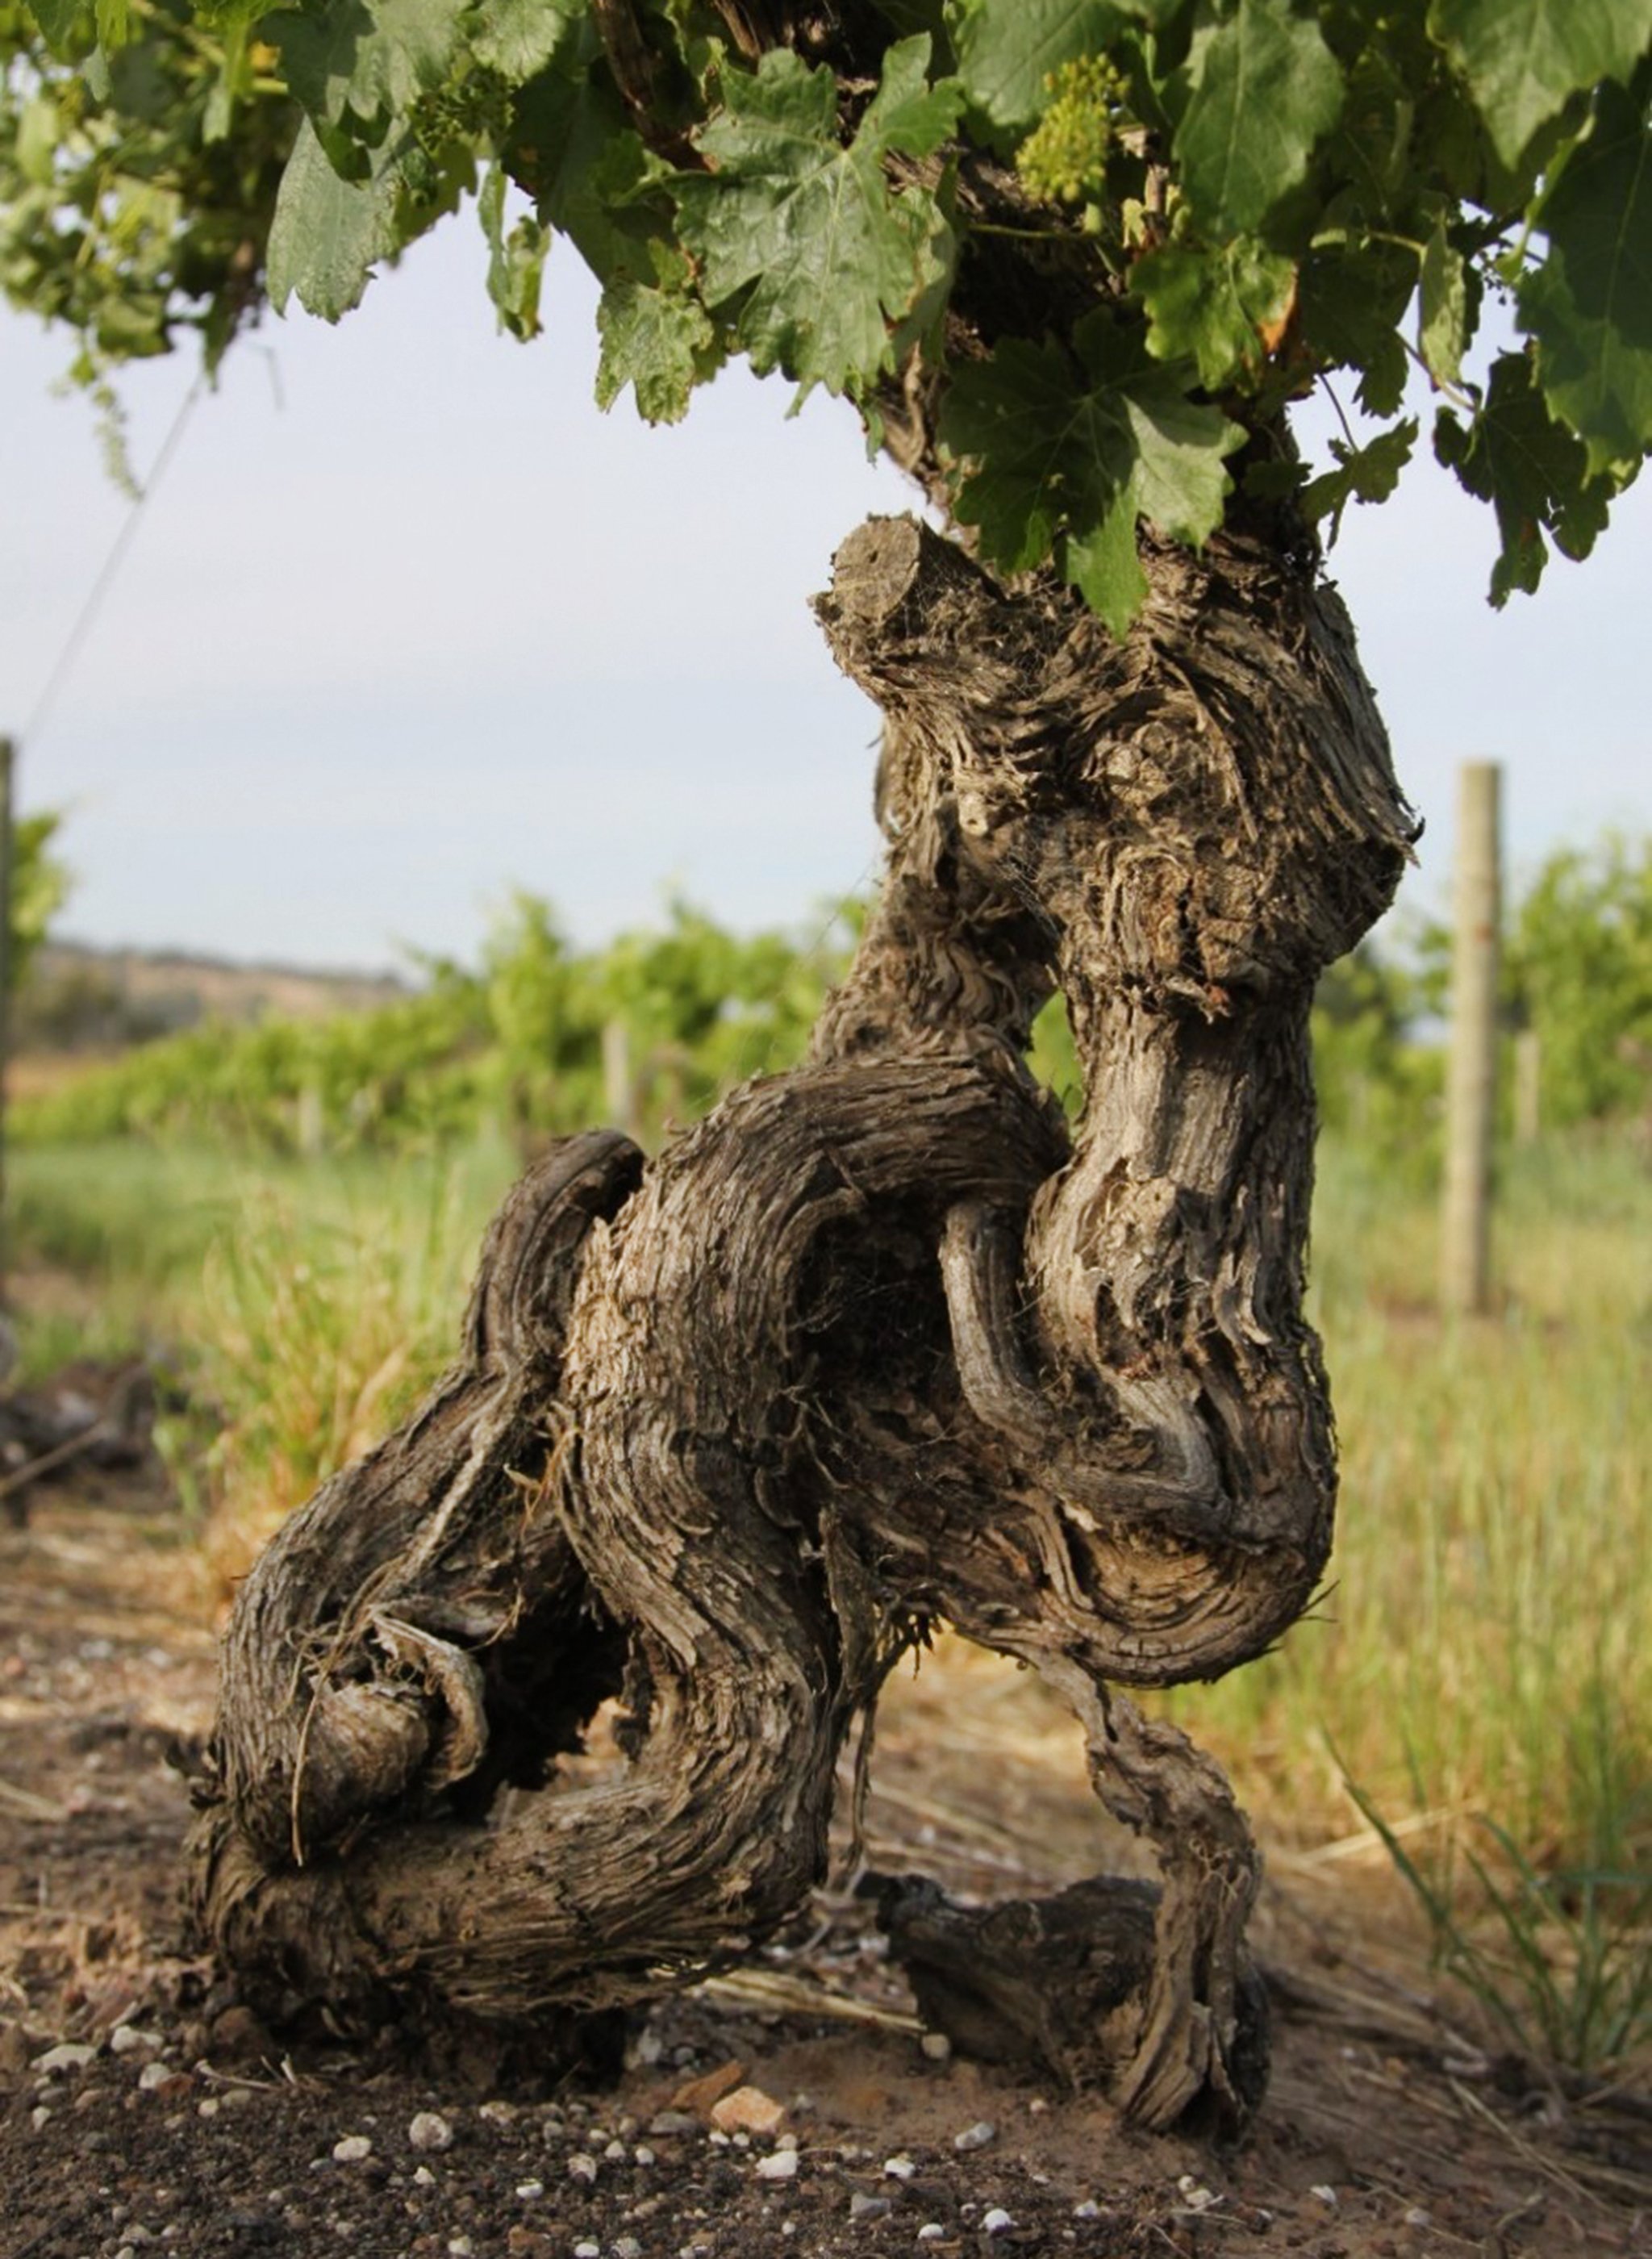 Old vines - here from Château Tanunda in the Barossa Valley/Australia - often have the appearance of small tree trunks.